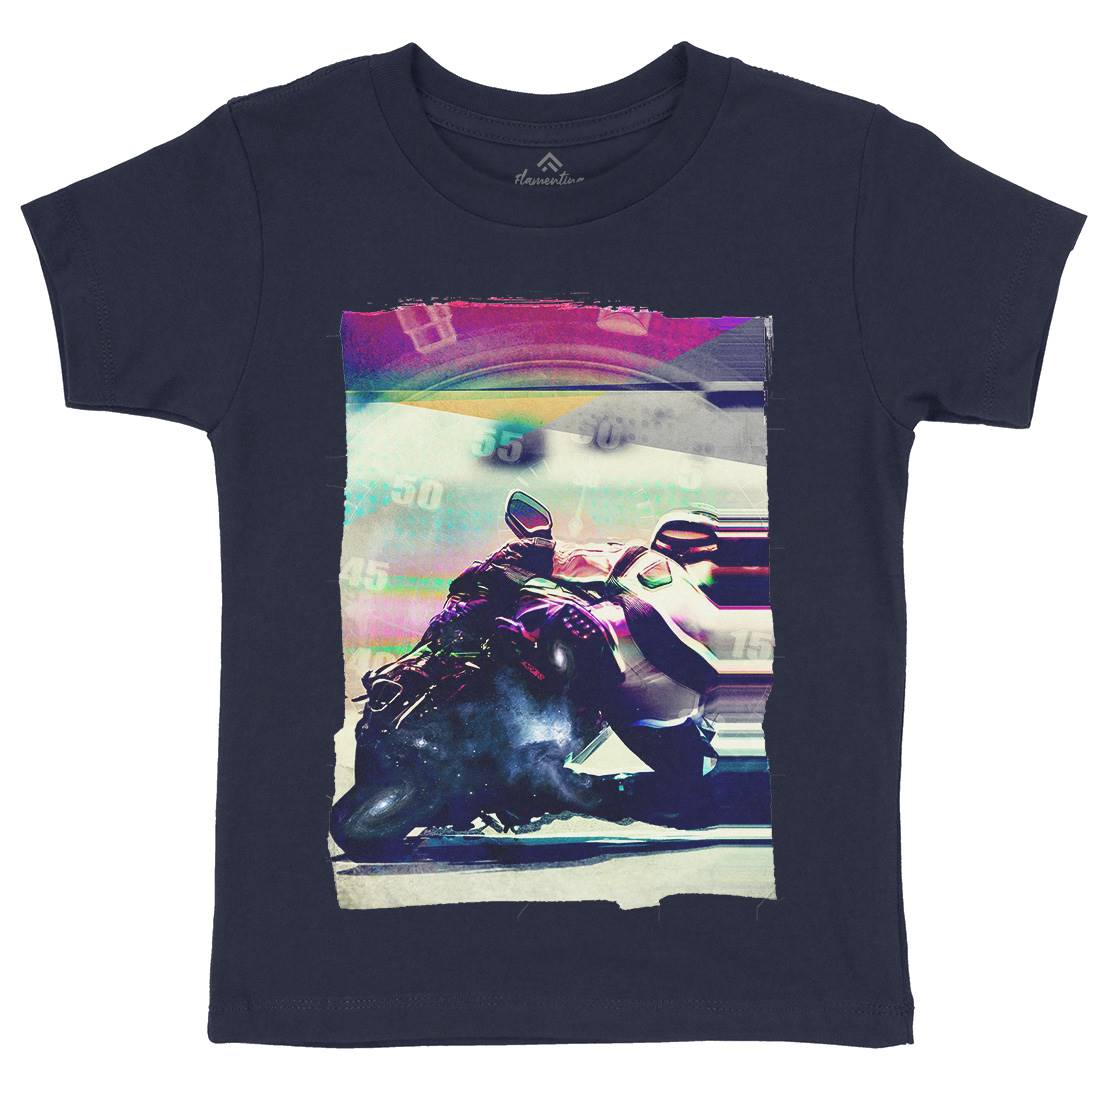 On Time Kids Organic Crew Neck T-Shirt Motorcycles A891